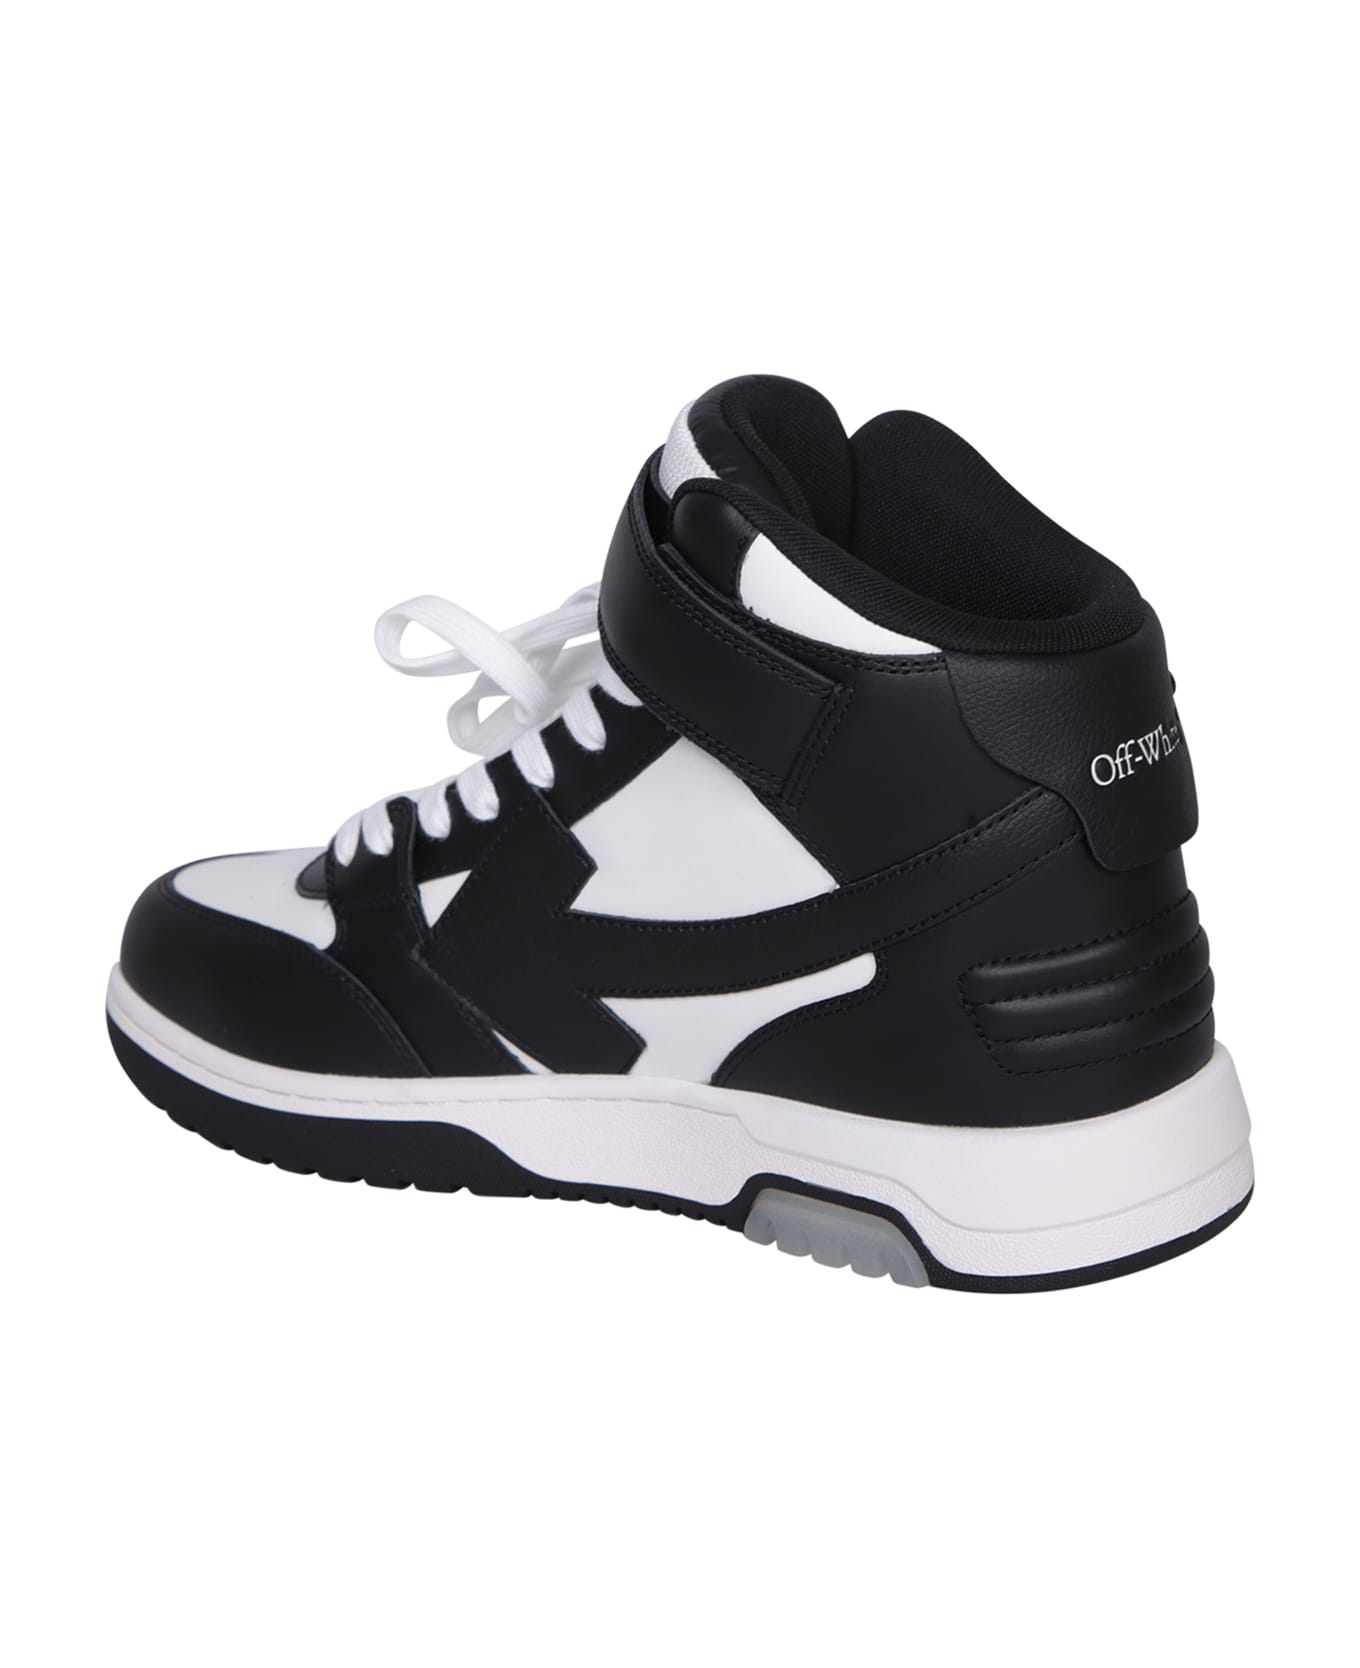 Off-White Out Of Office High Black/white Sneakers - White